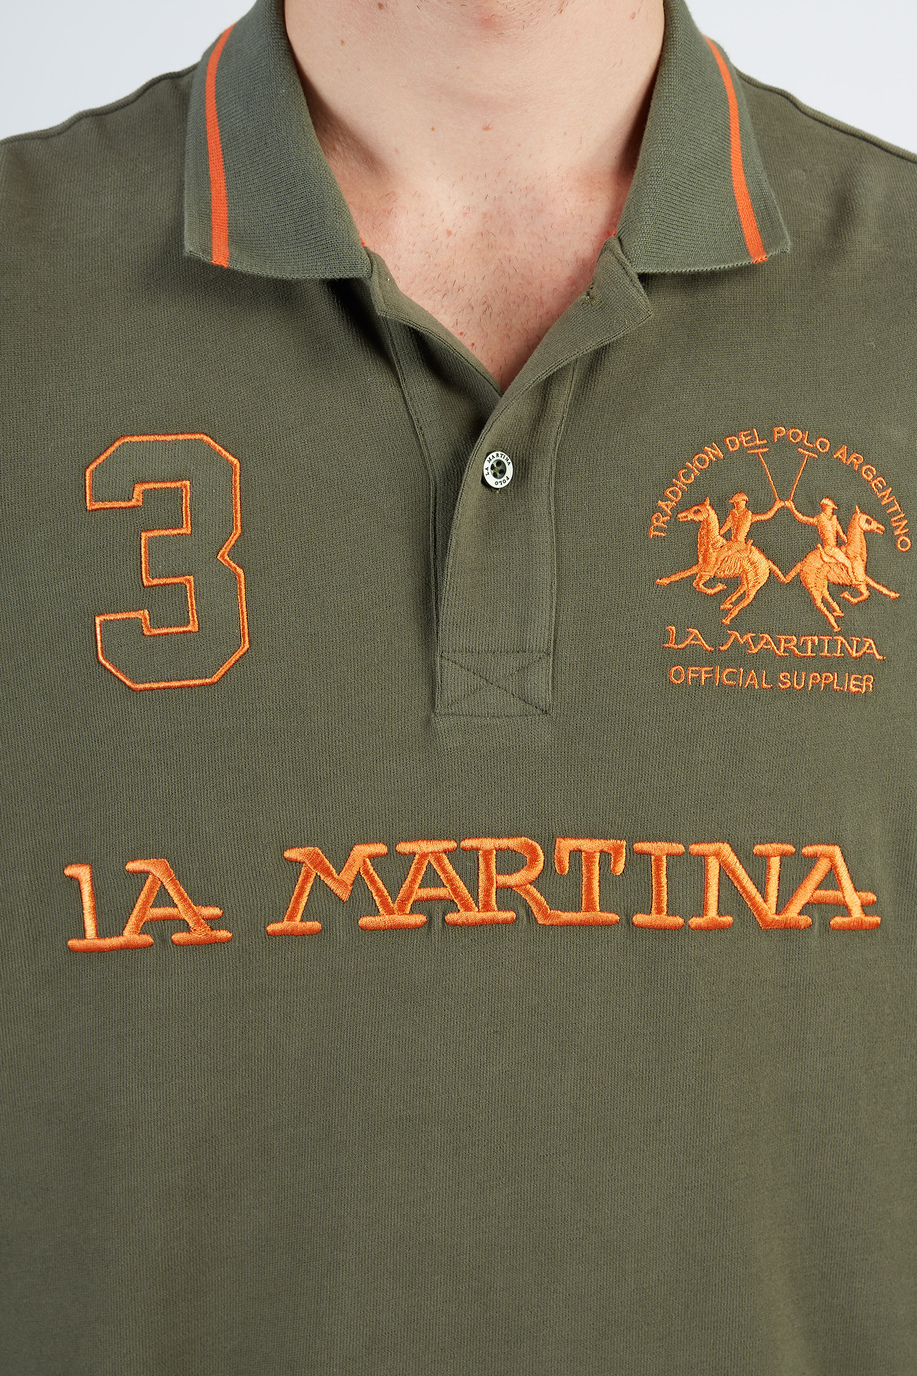 Men’s 100% regular fit cotton polo shirt with long sleeves - Latest | La Martina - Official Online Shop